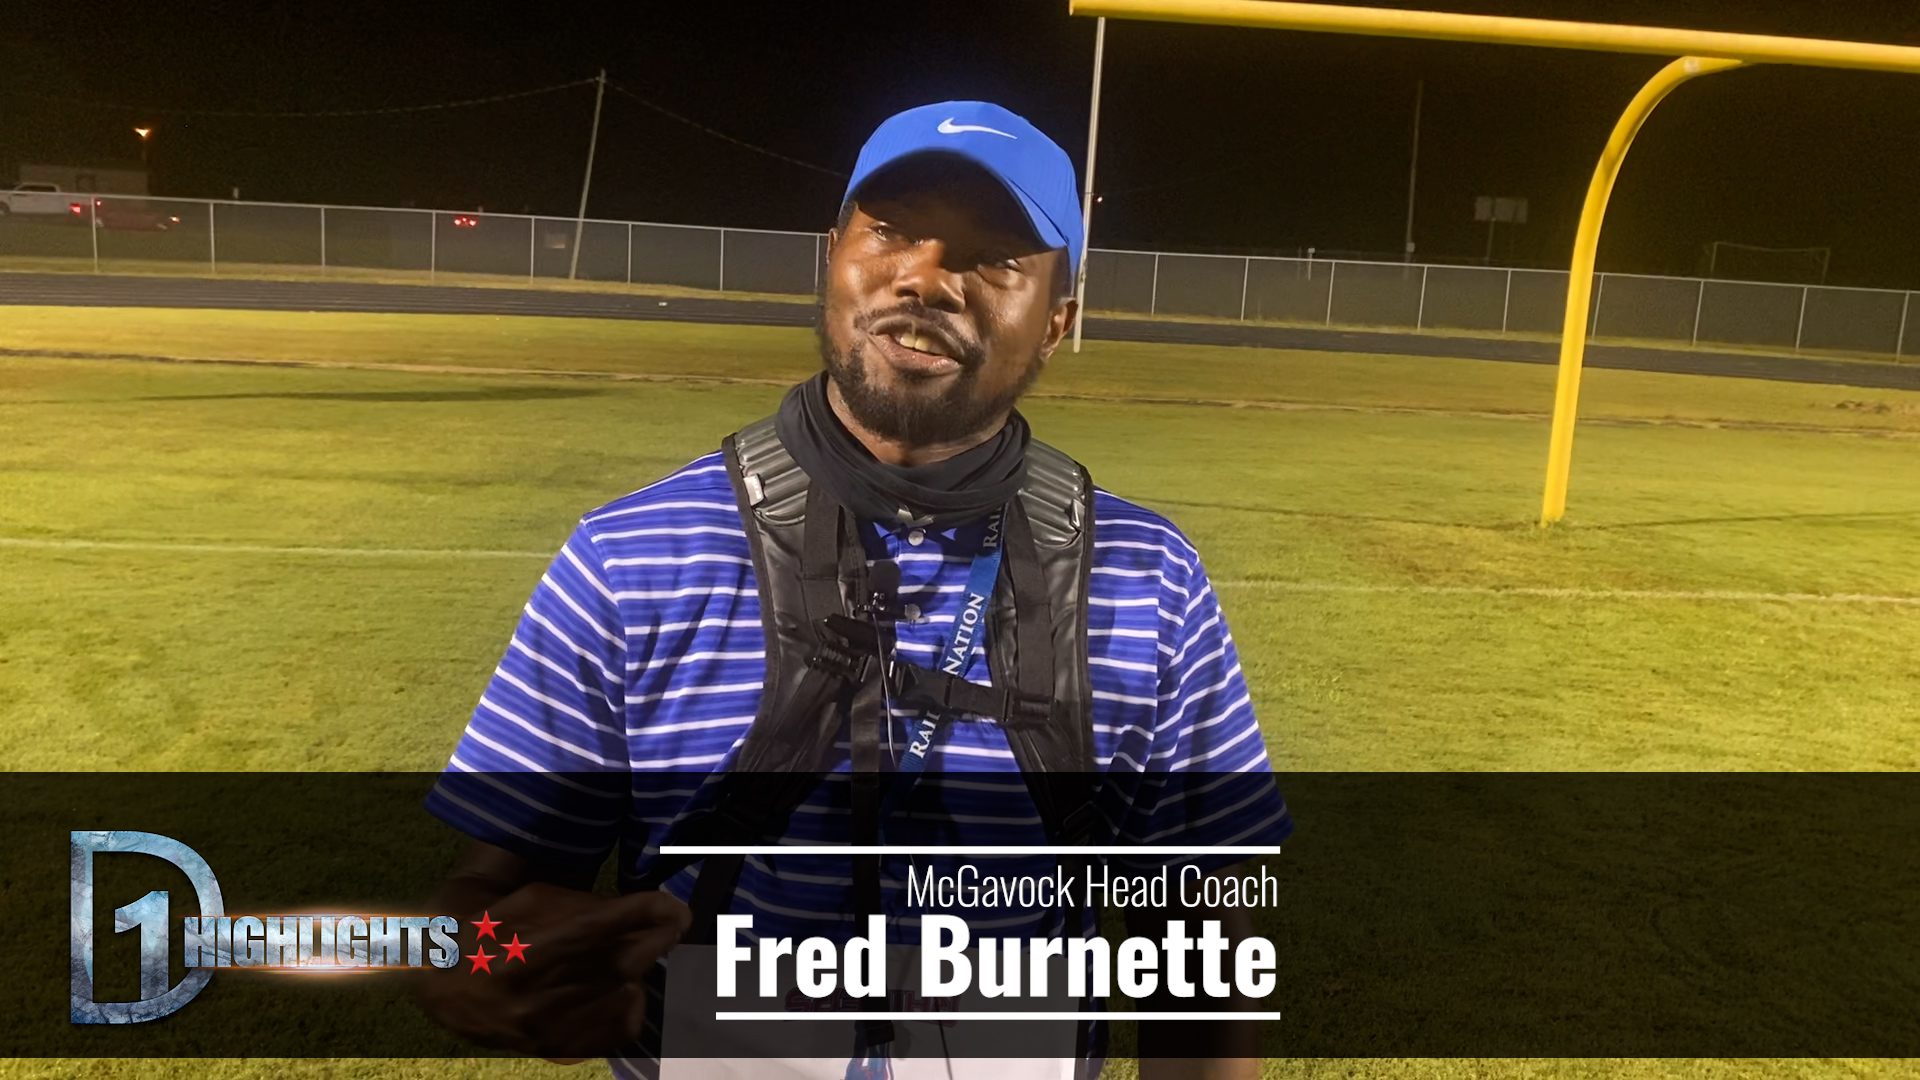 McGavock Head Coach Fred Burnette Post Game Interview